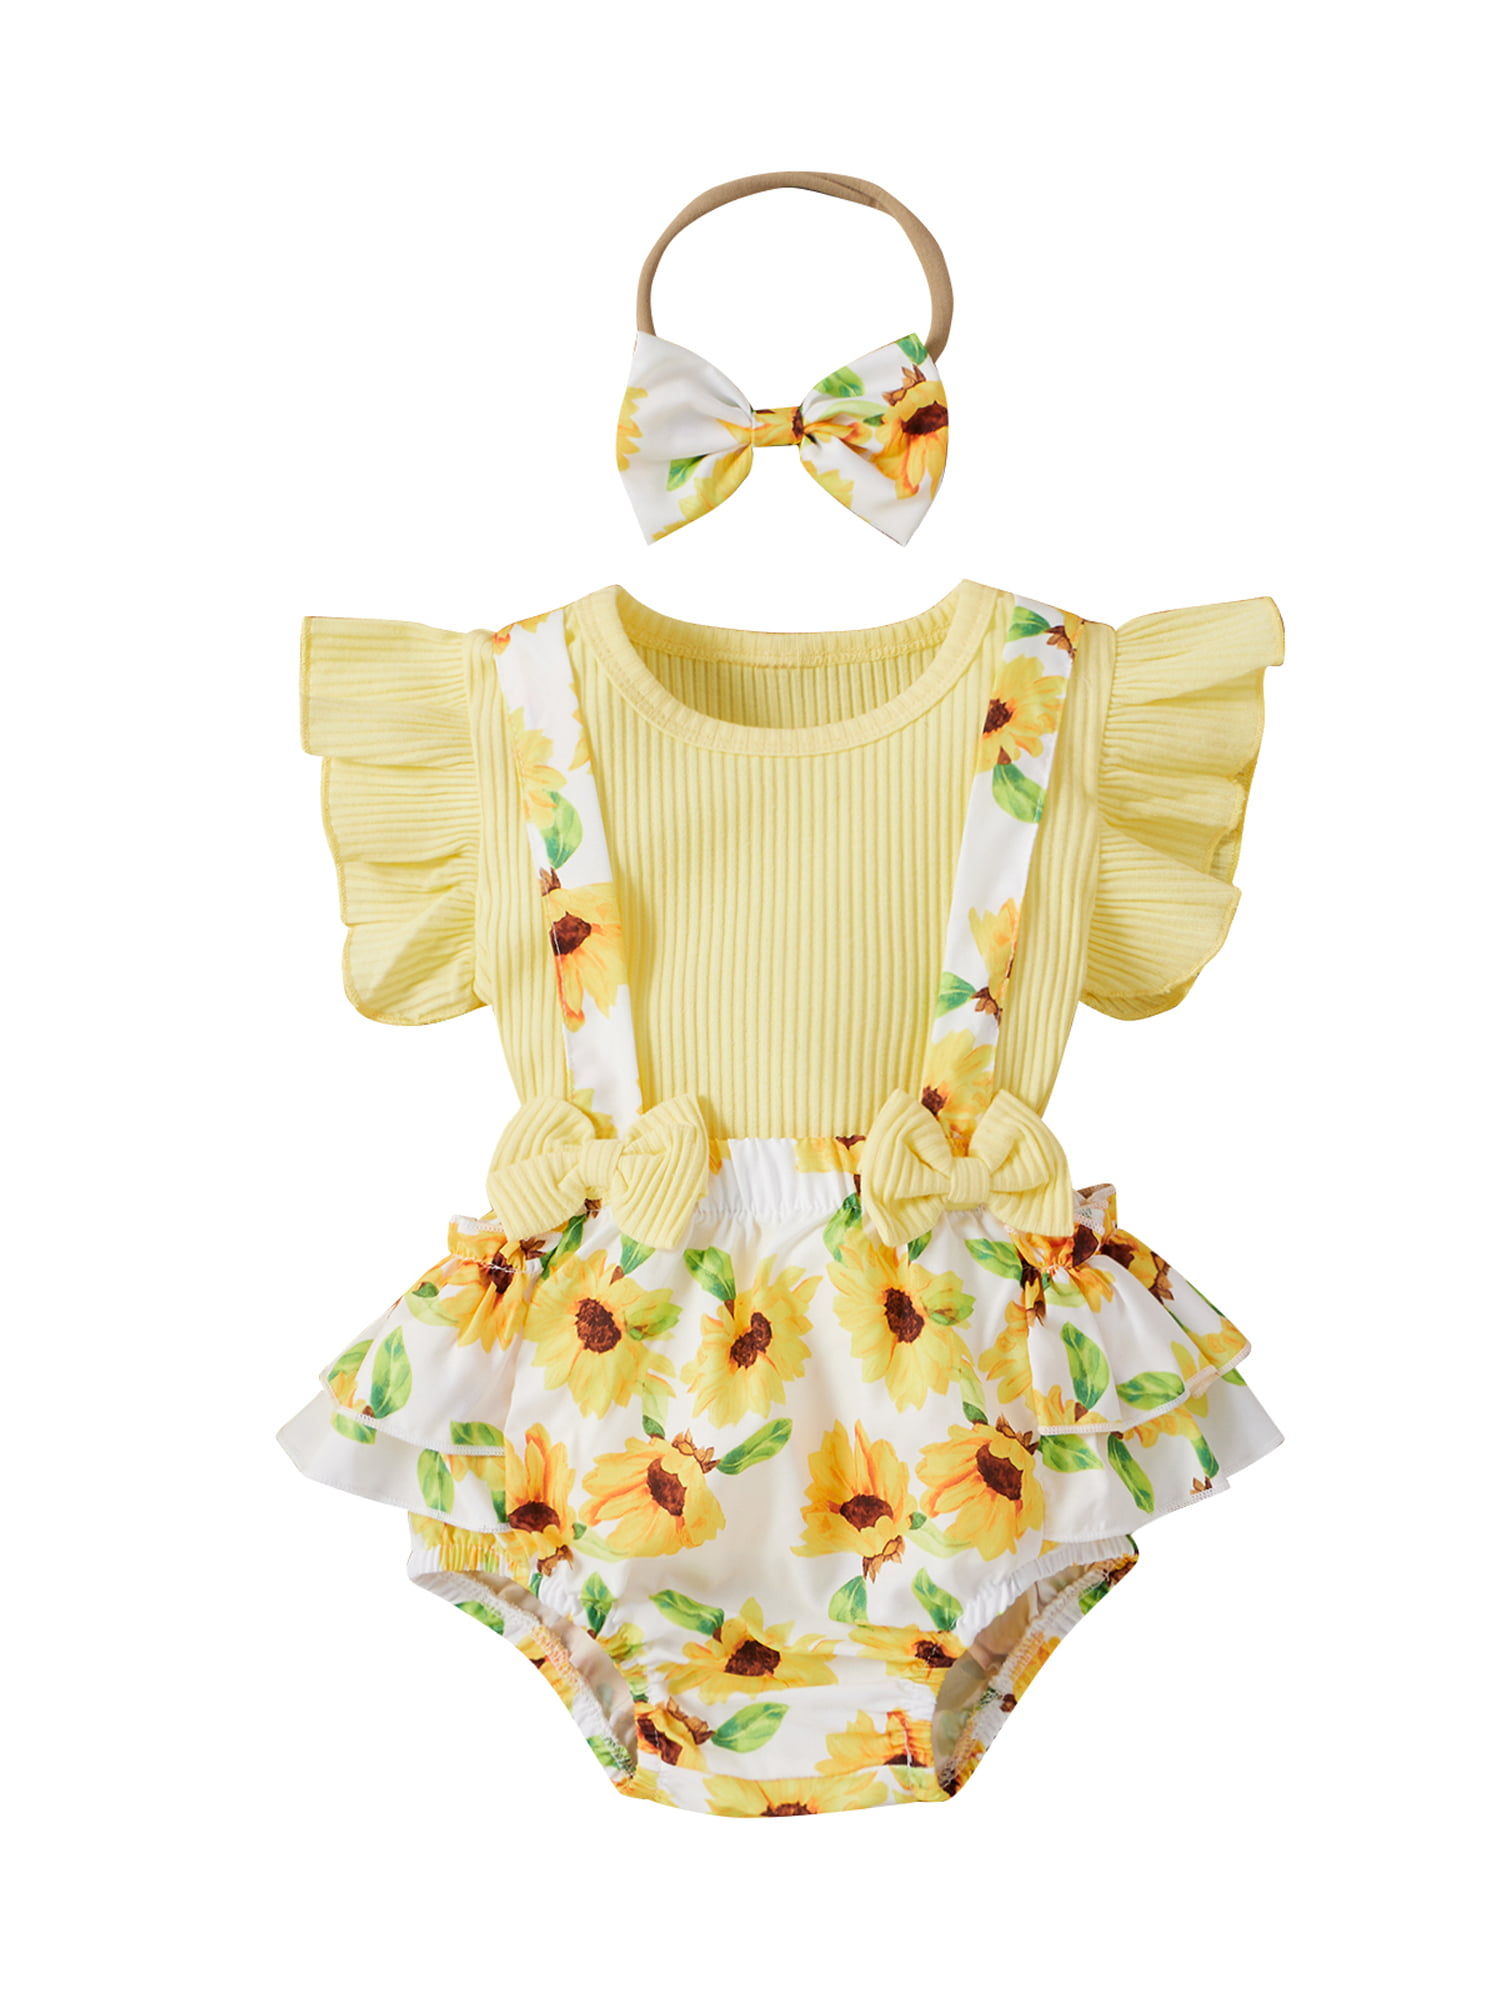 Infant Newborn Baby Girl Floral Summer Outfits Ruffle Sleeve Ribbed T-Shirt and Suspender Shorts with Headband